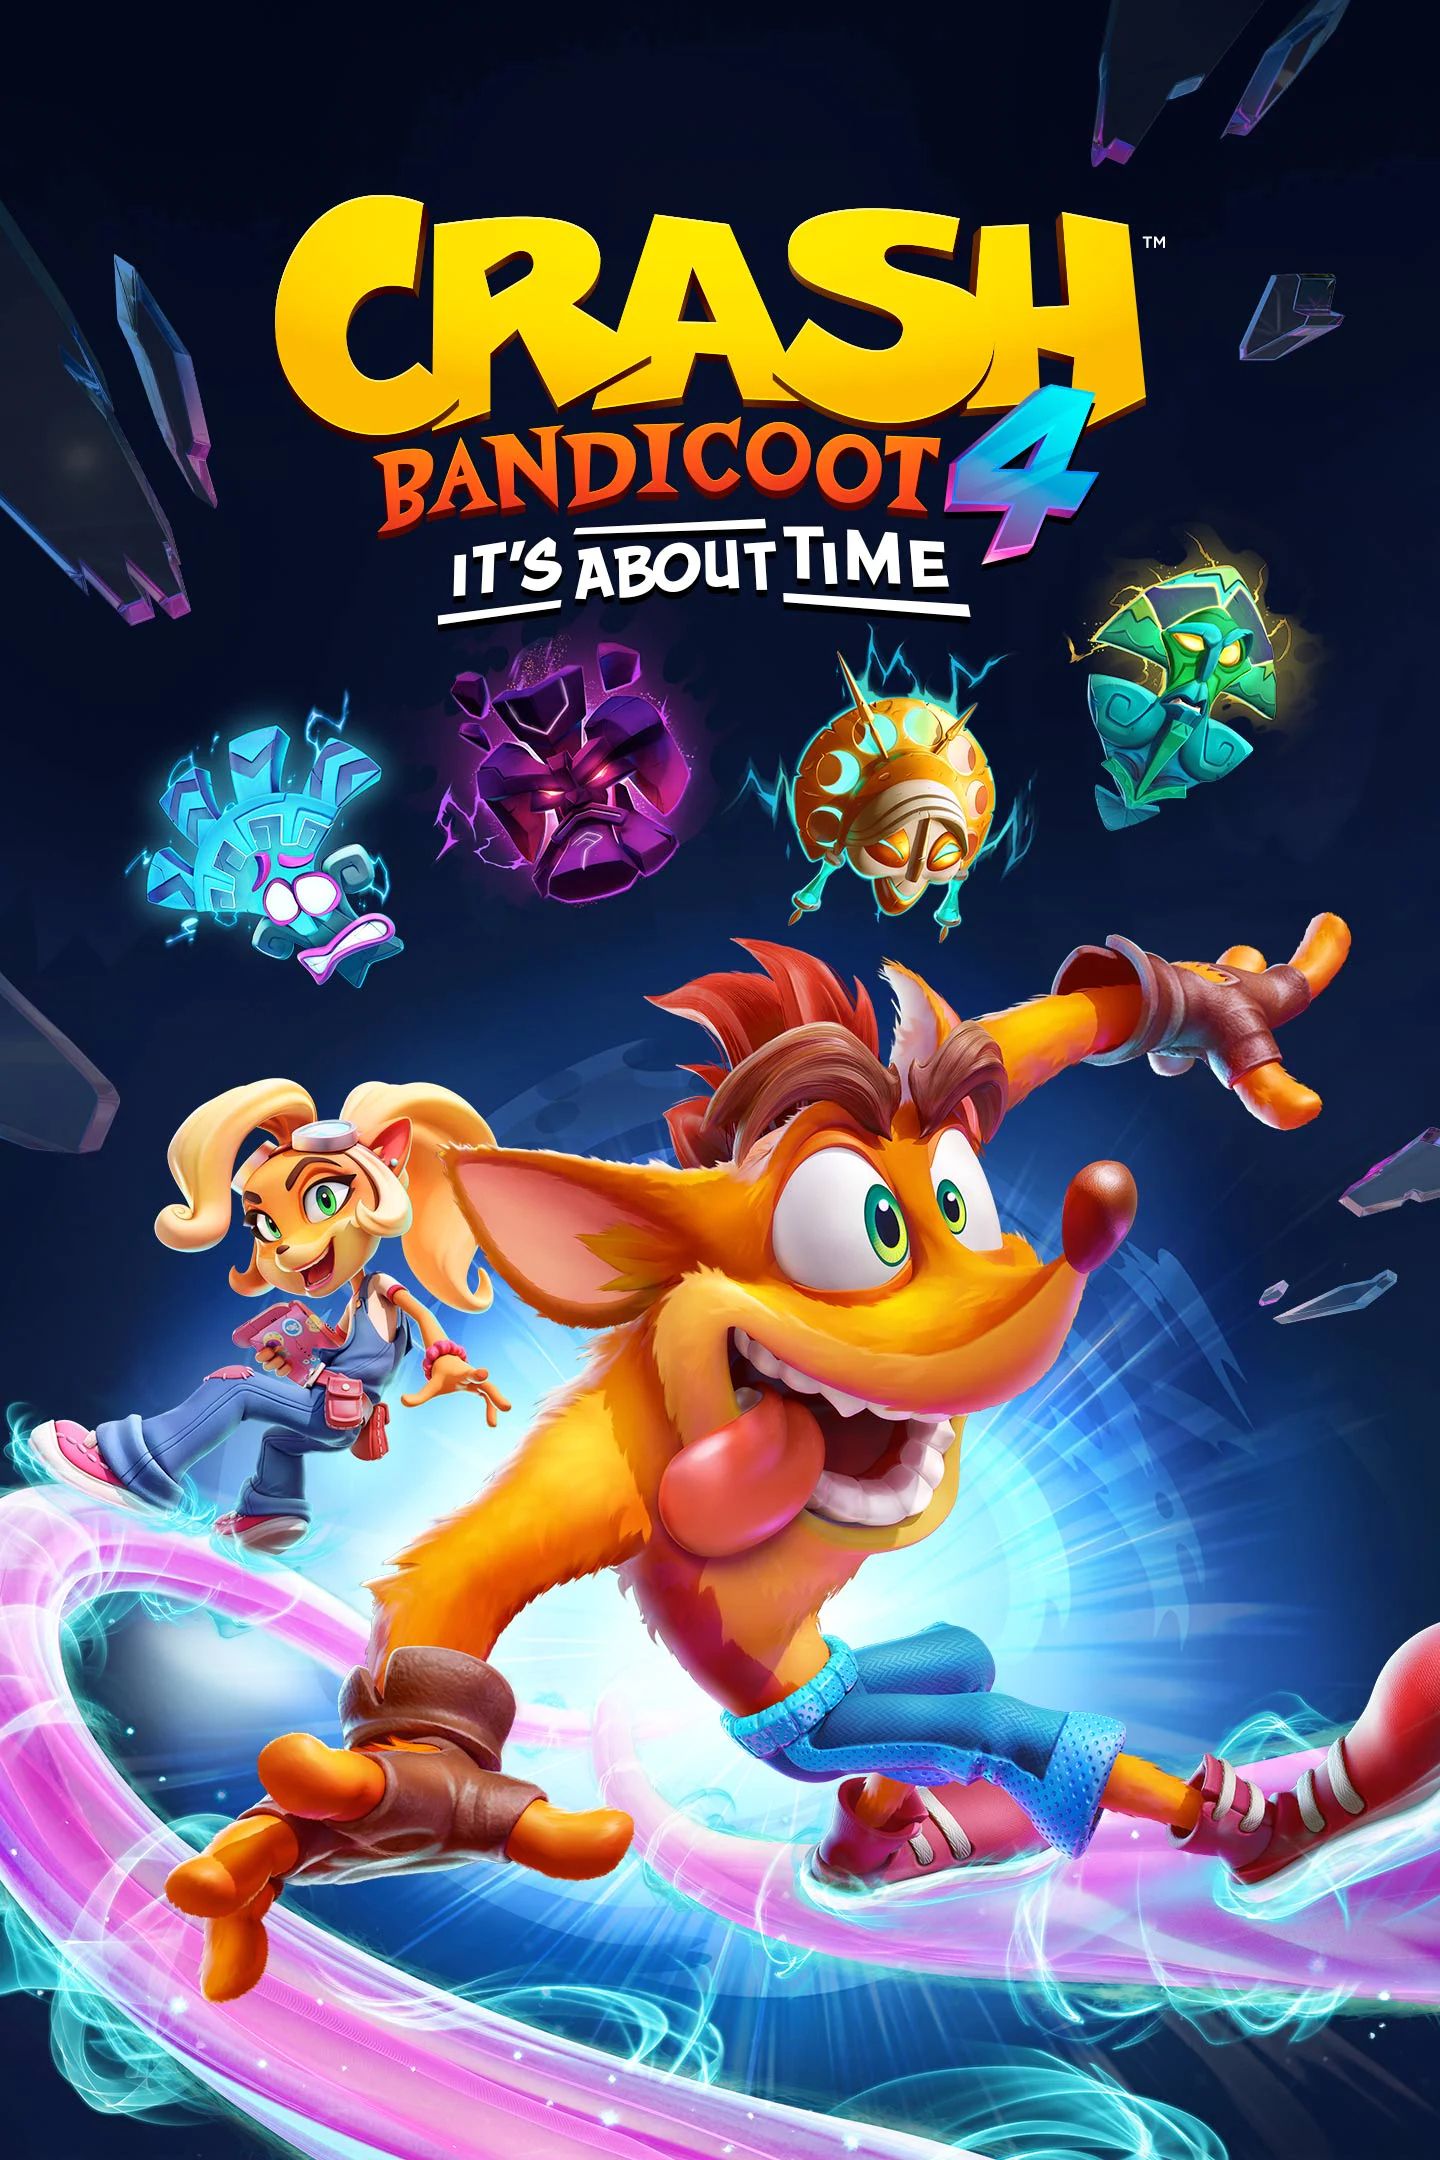 Crash Bandicoot 4 Its about time Movie Poster